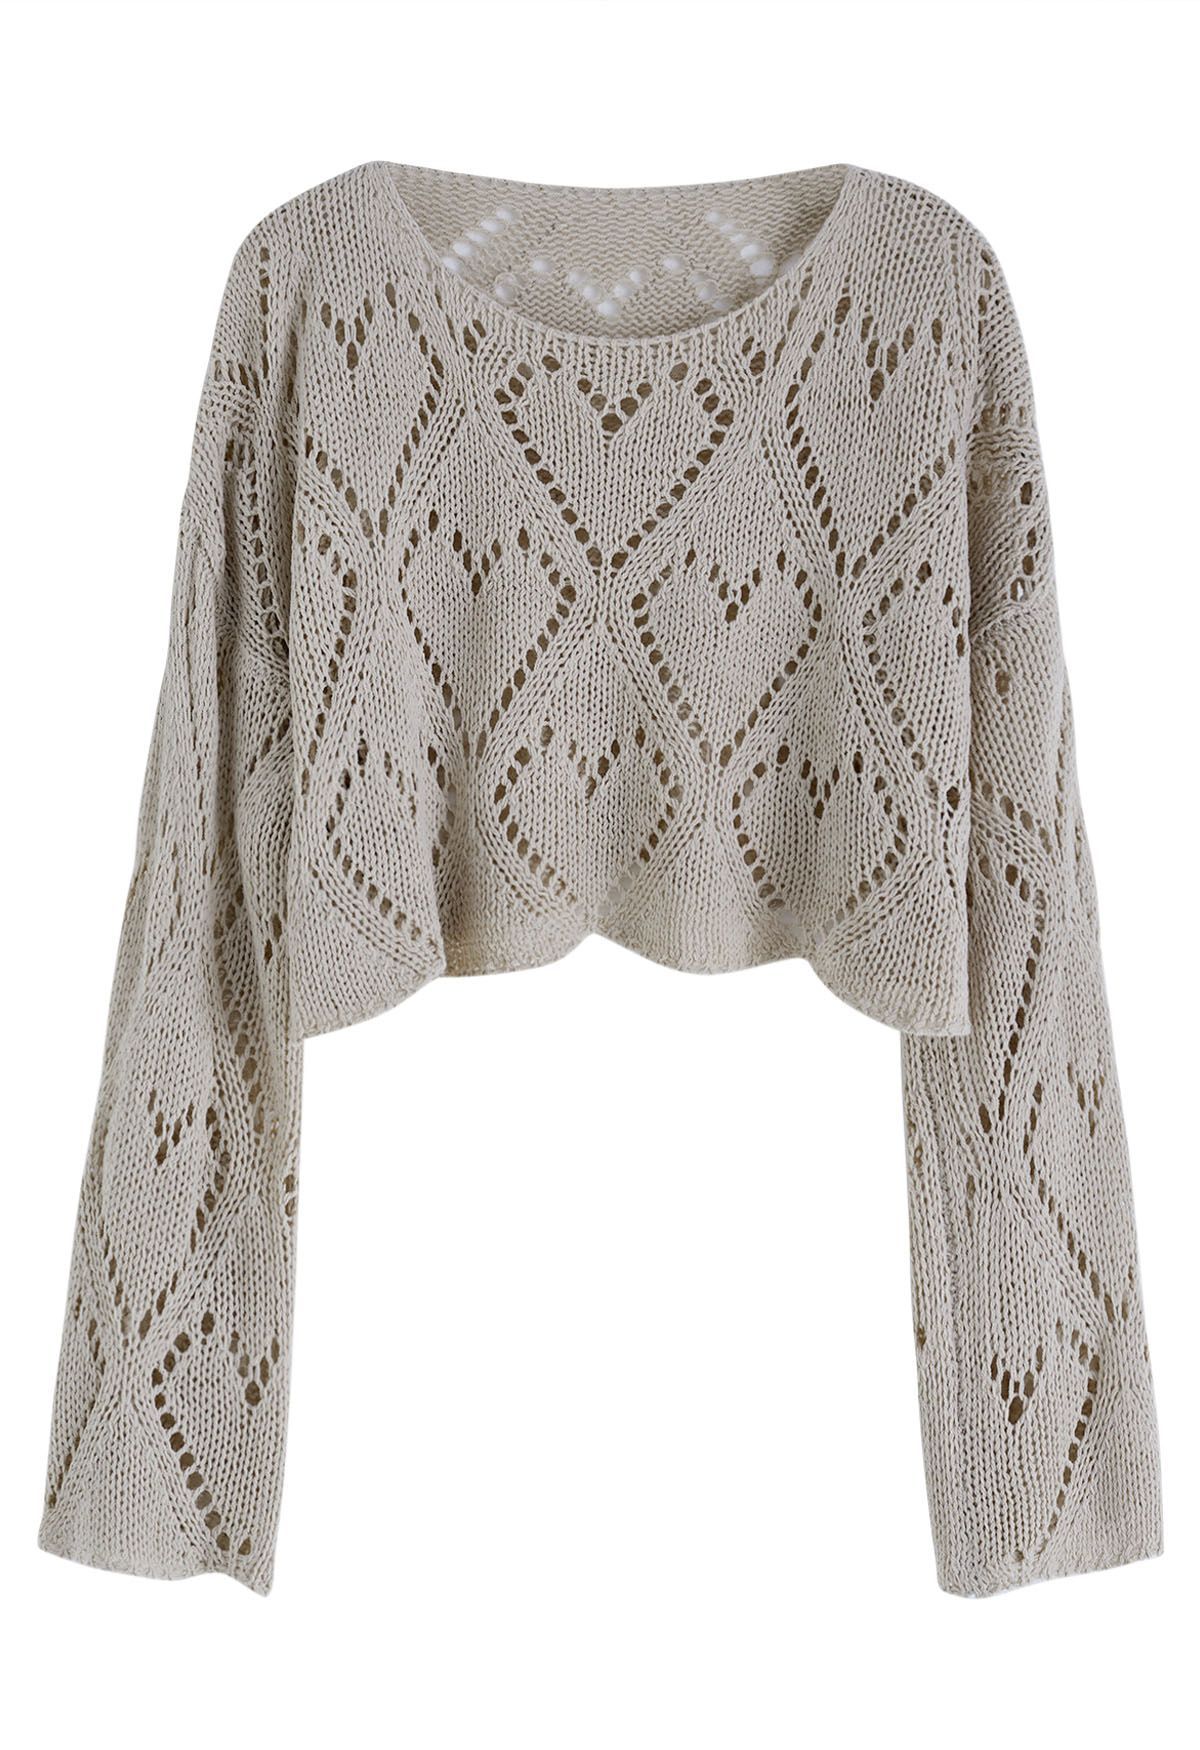 Heart Pattern Openwork Knit Top in Taupe | Chicwish